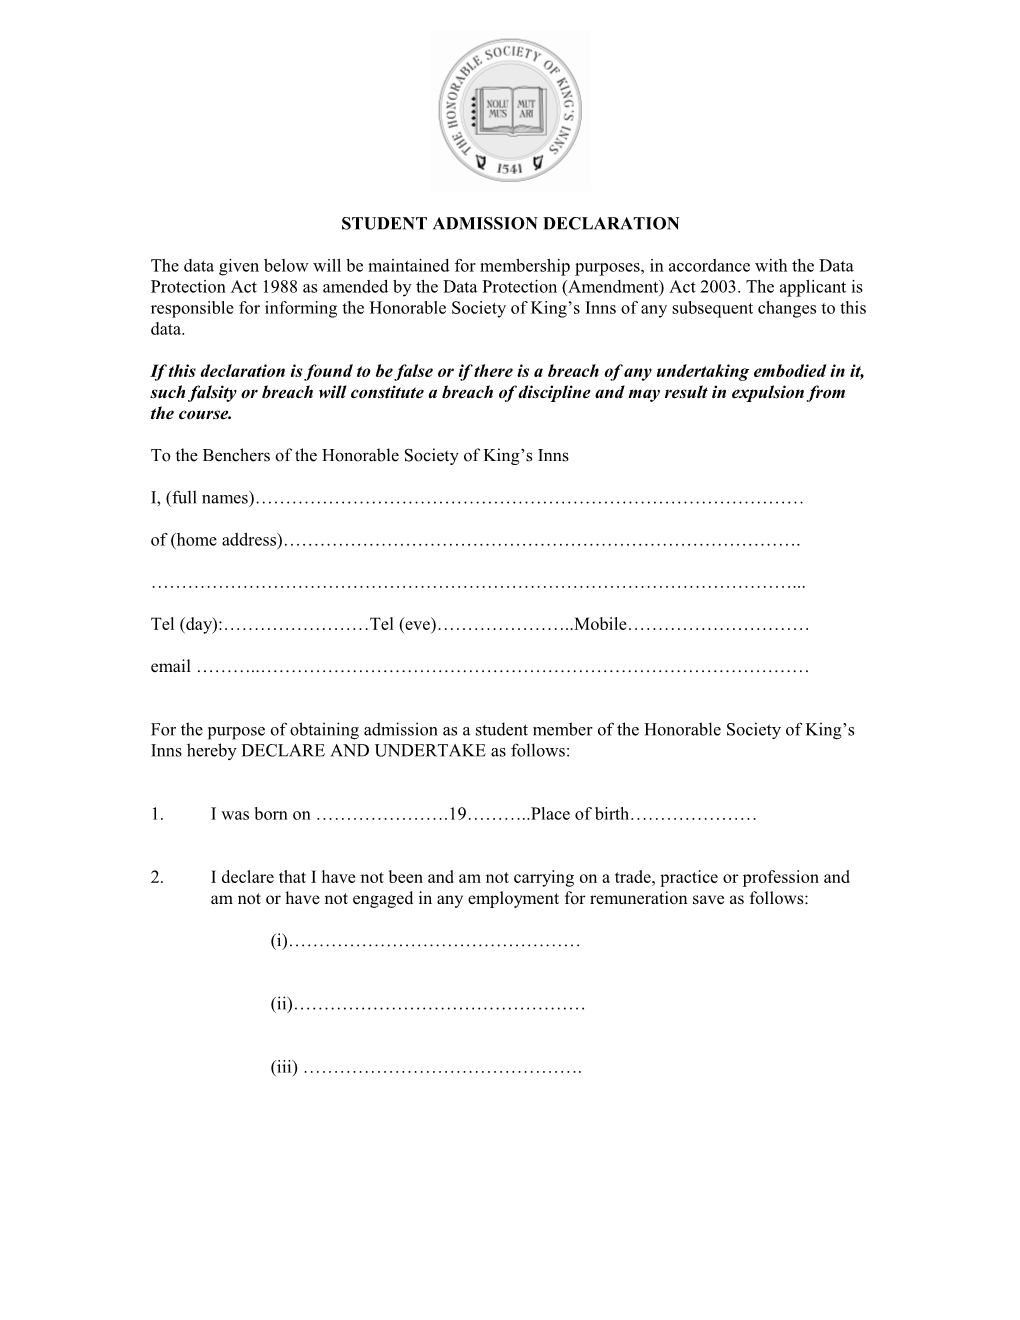 Application Form for Admission As a Student of the Inner Temple